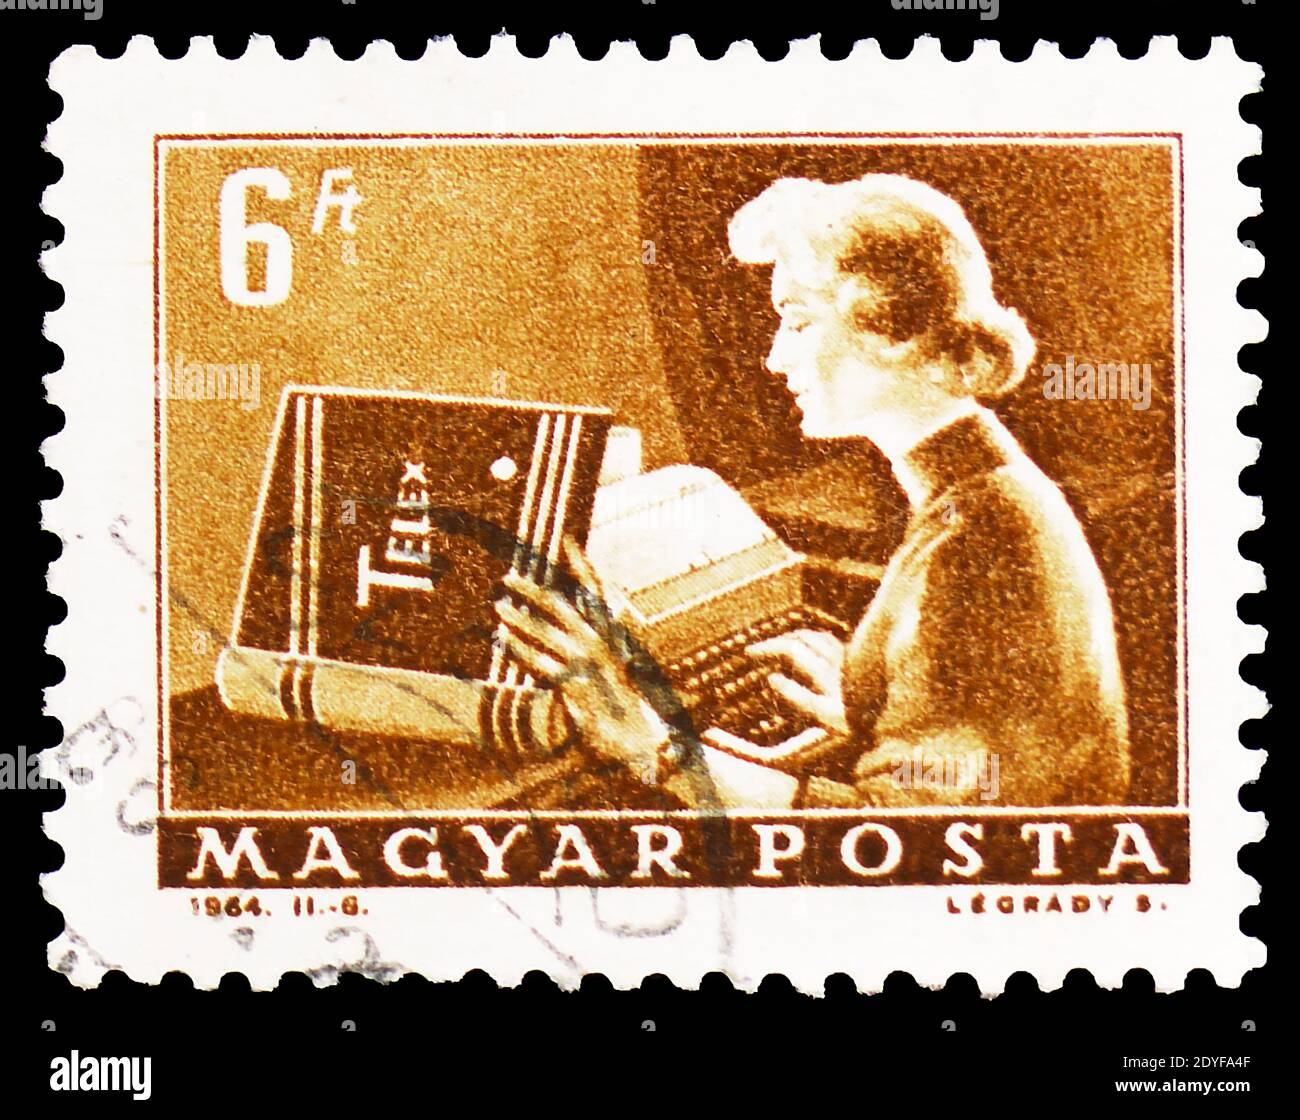 MOSCOW, RUSSIA - FEBRUARY 22, 2019: A stamp printed in Hungary shows Telex operator, Transport and Telecommunication serie, circa 1964 Stock Photo